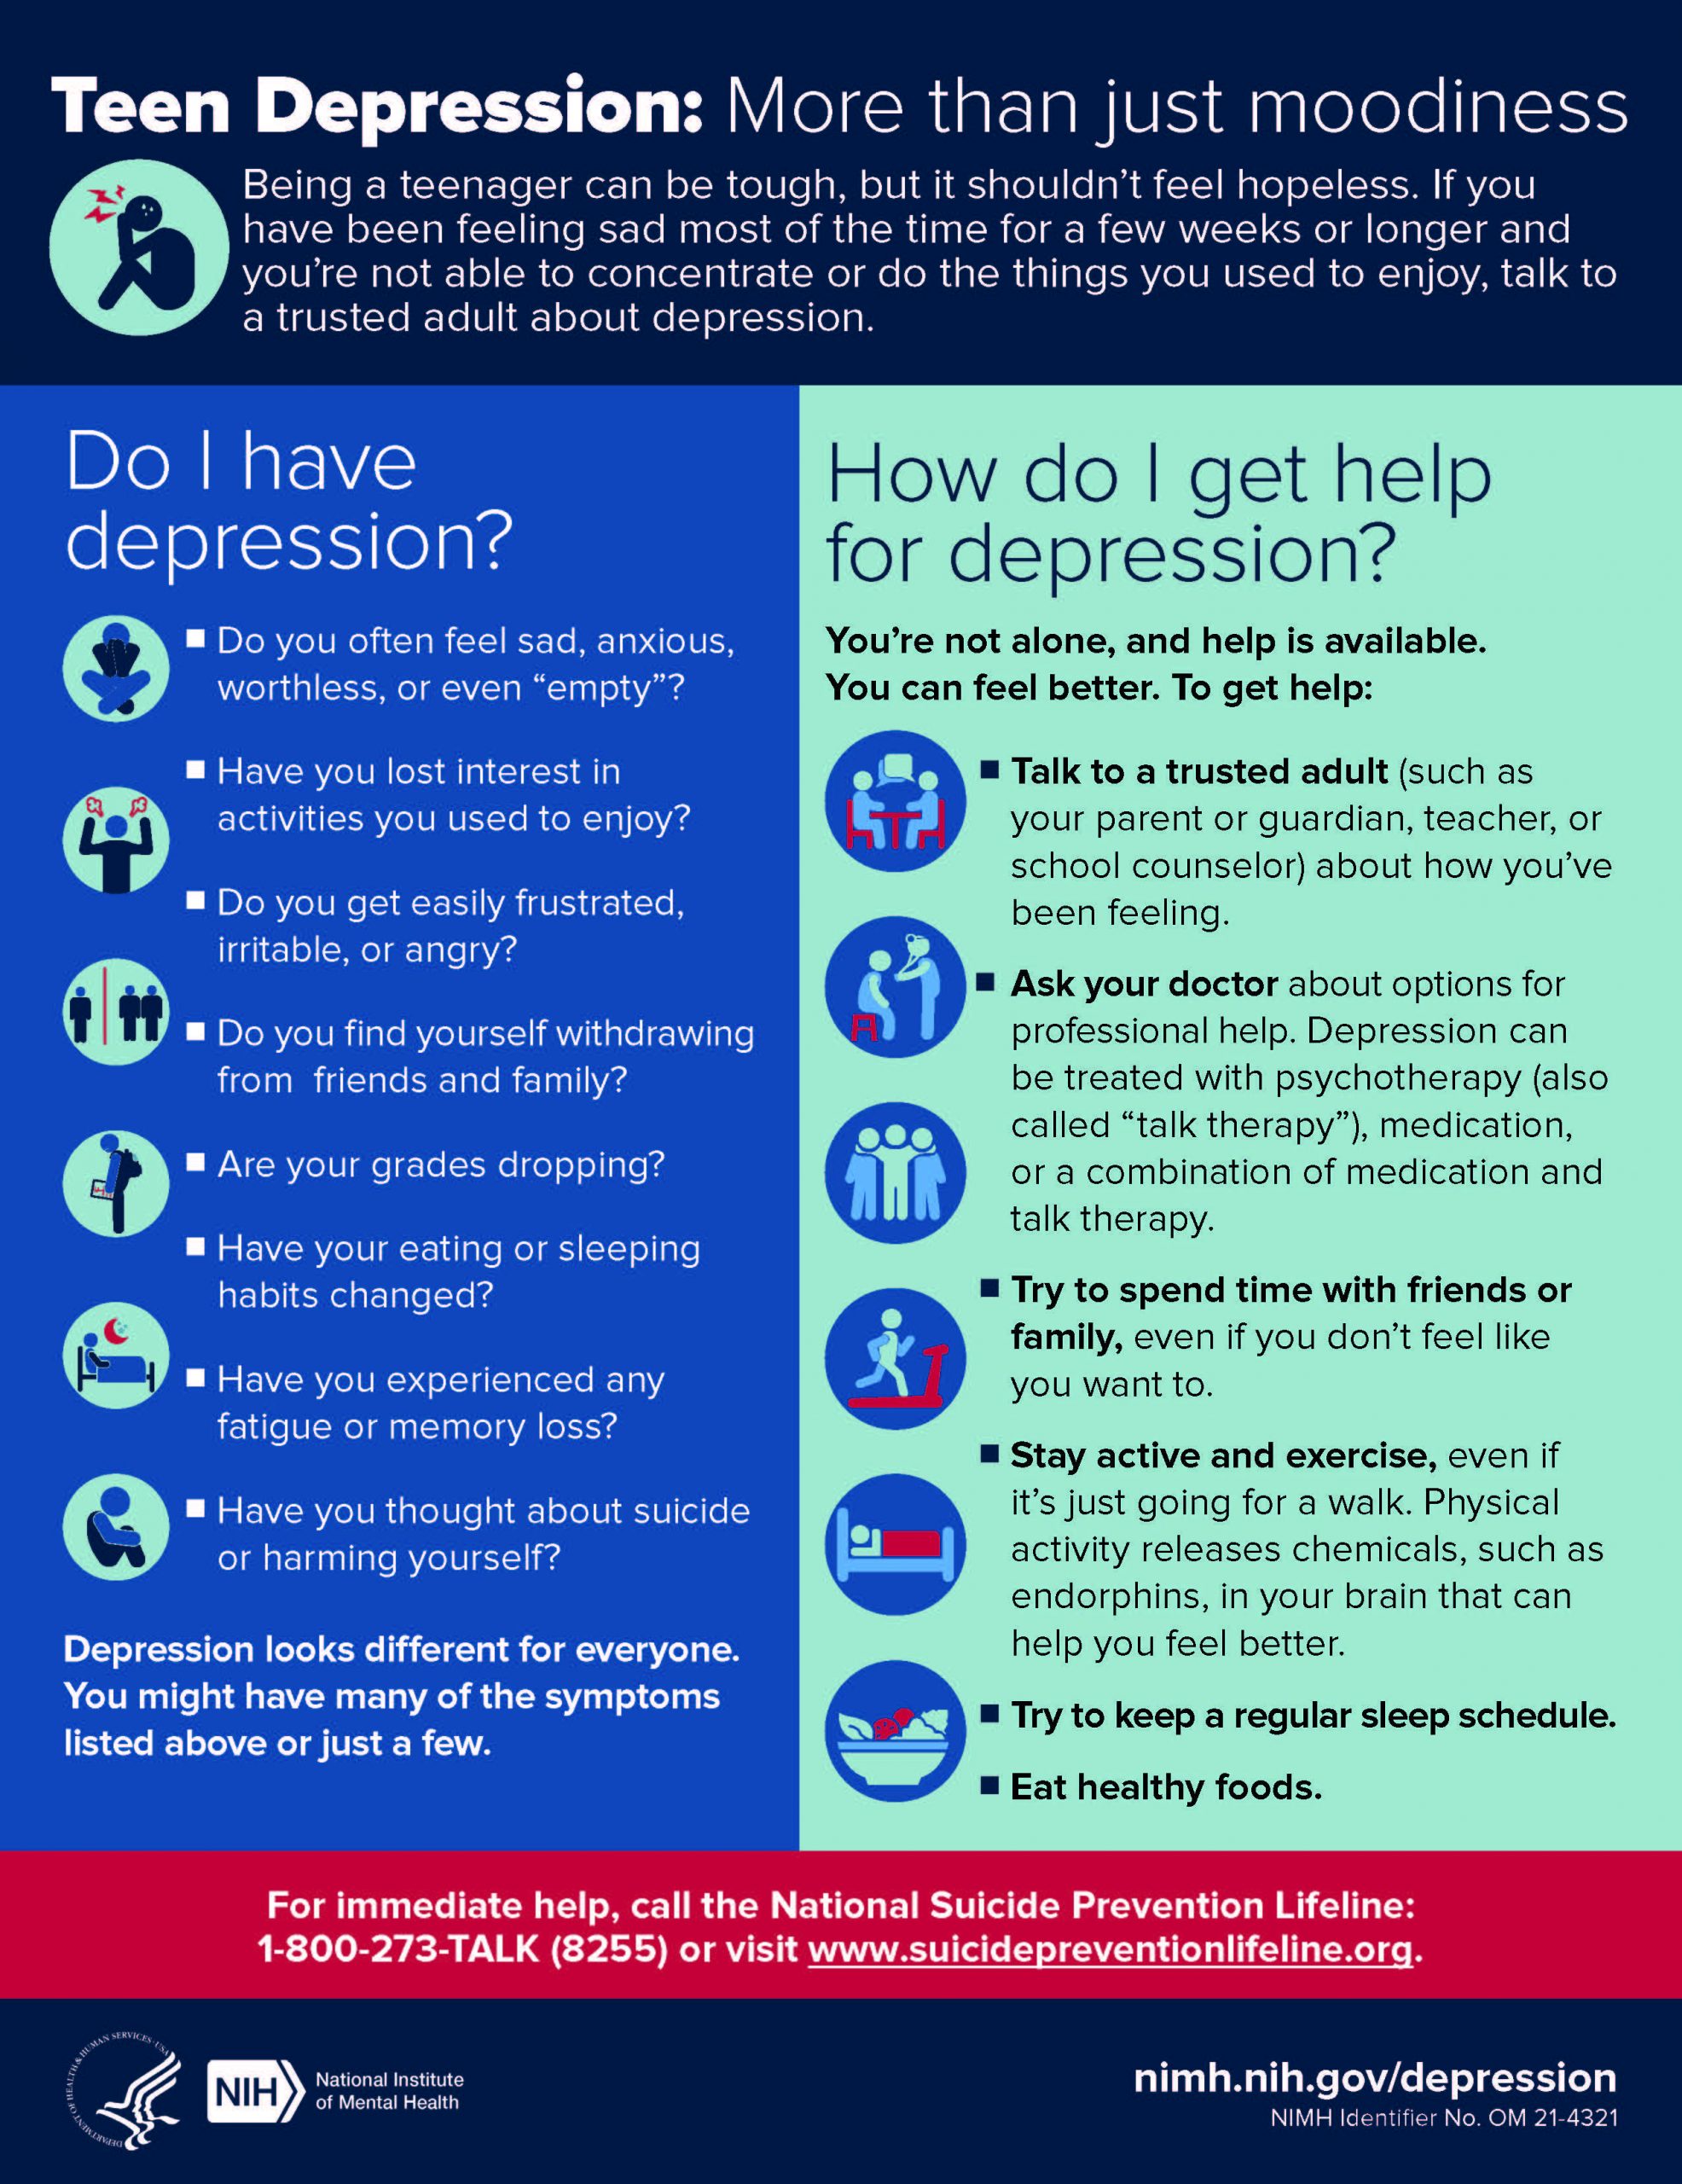 An infographic titled "Teen Depression: More Than Just Moodiness"